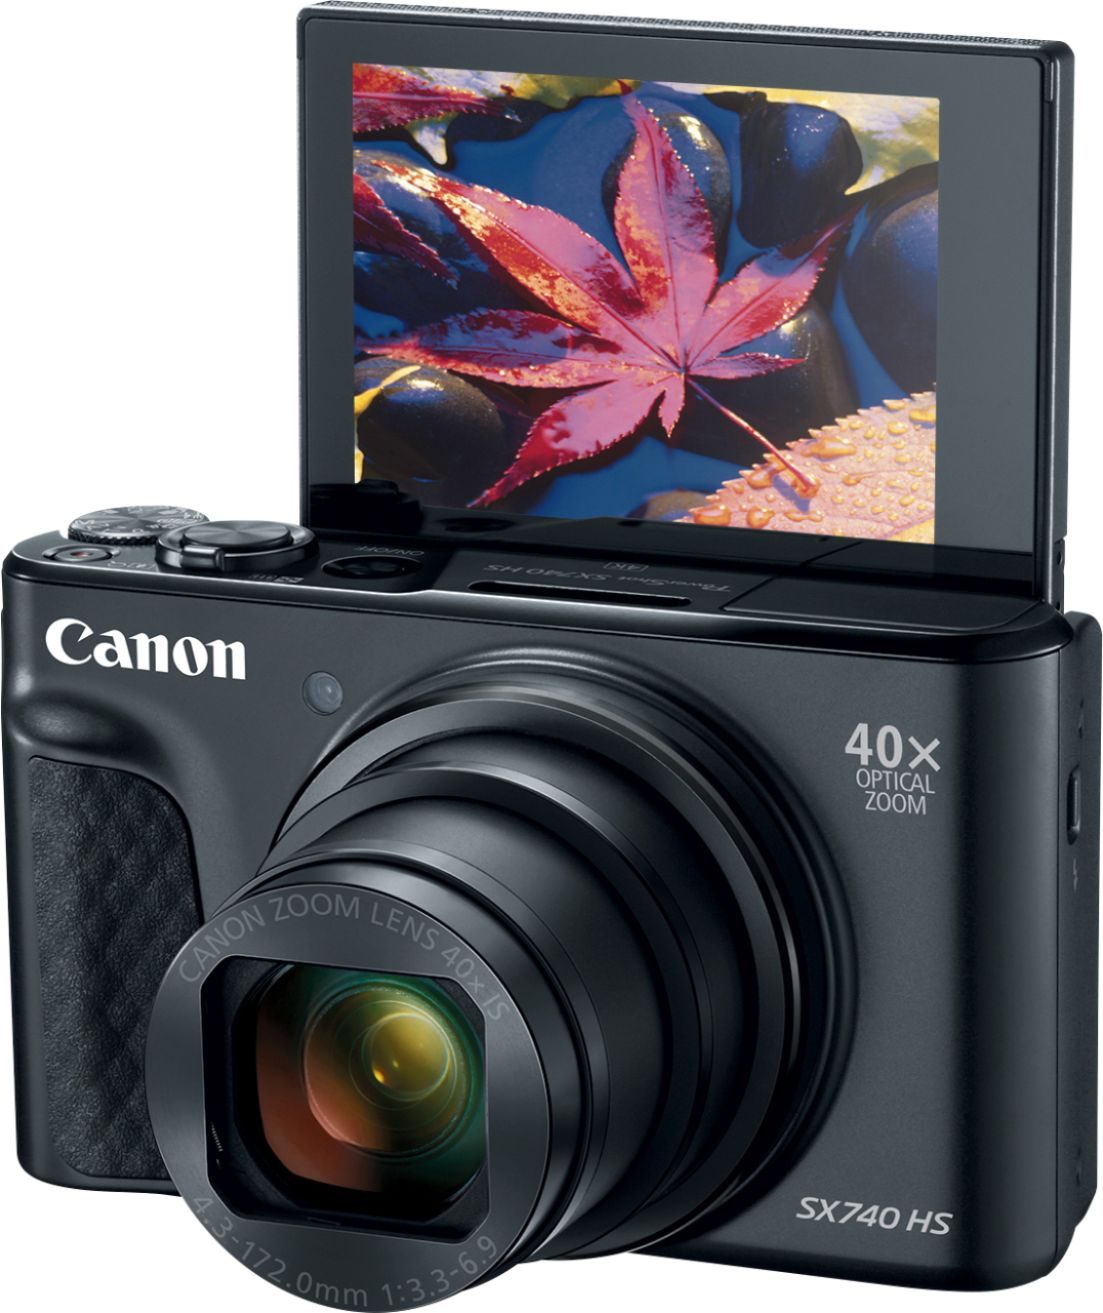 Full Color & Protective Covers! Canon SX740 HS Instruction Manual 